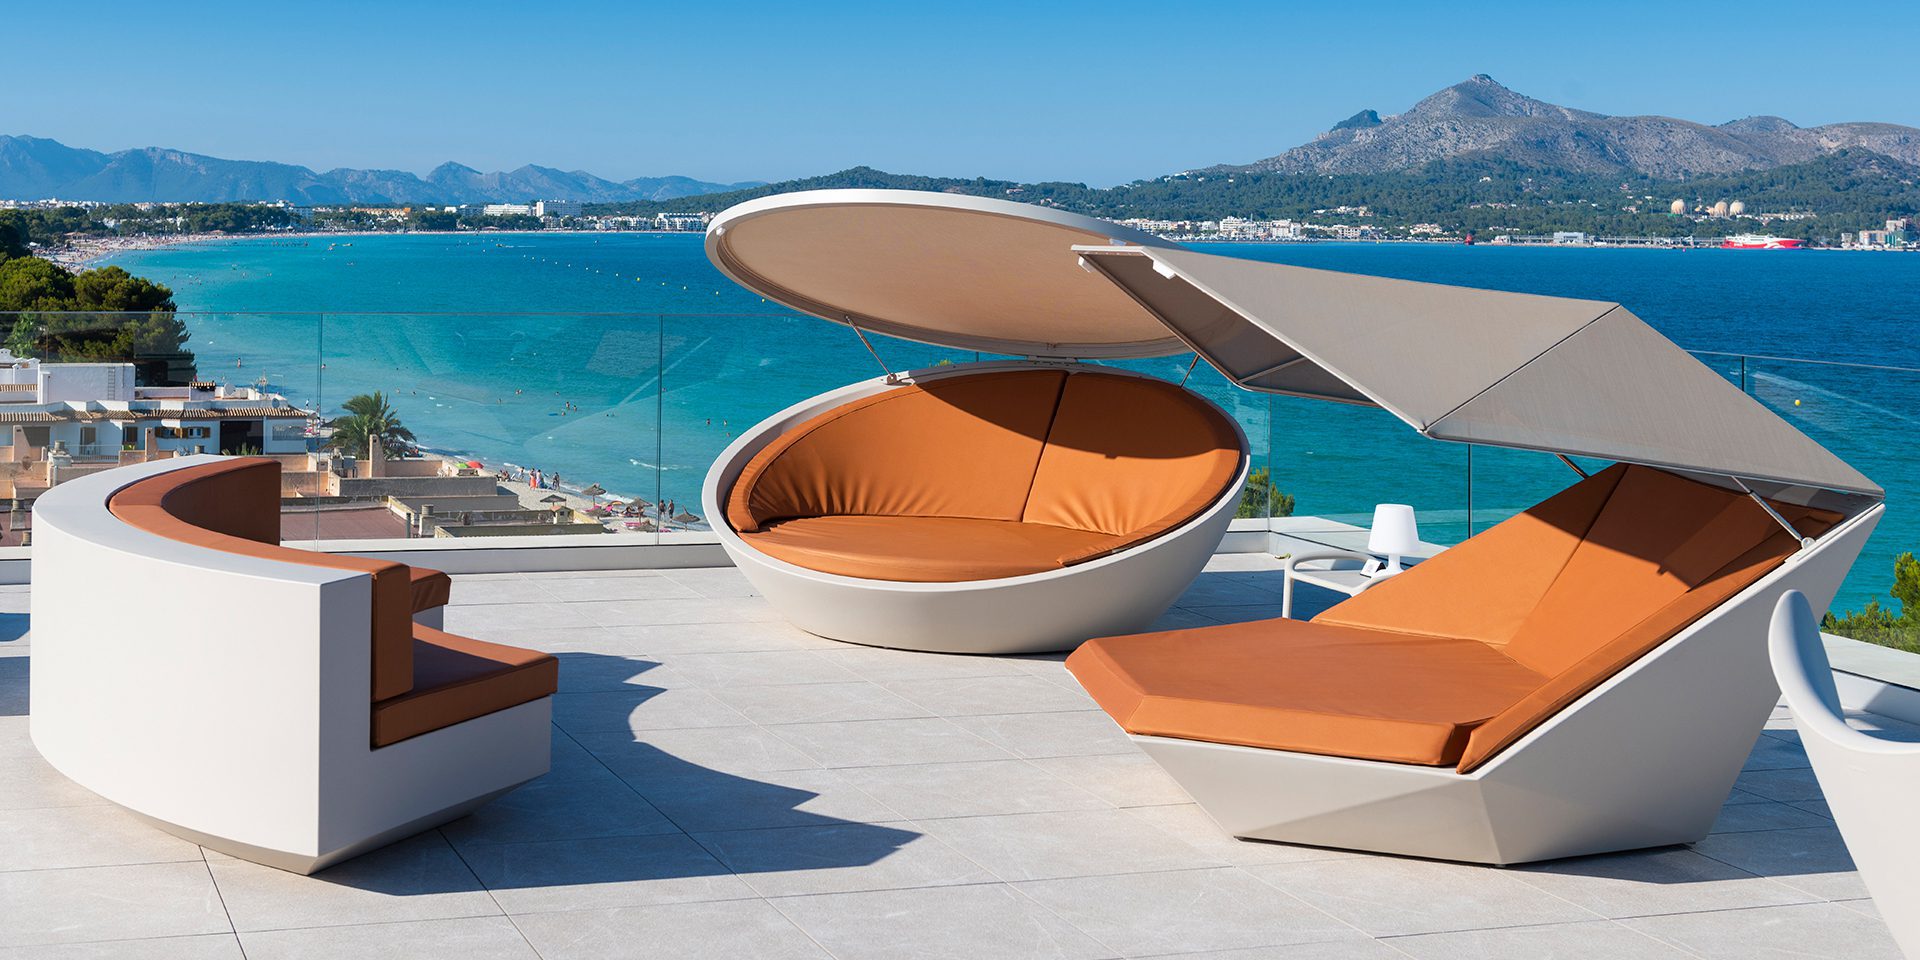 Outdoor contract furniture Faz and Ulm daybeds and Vela sofa, hospitality furniture by Vondom